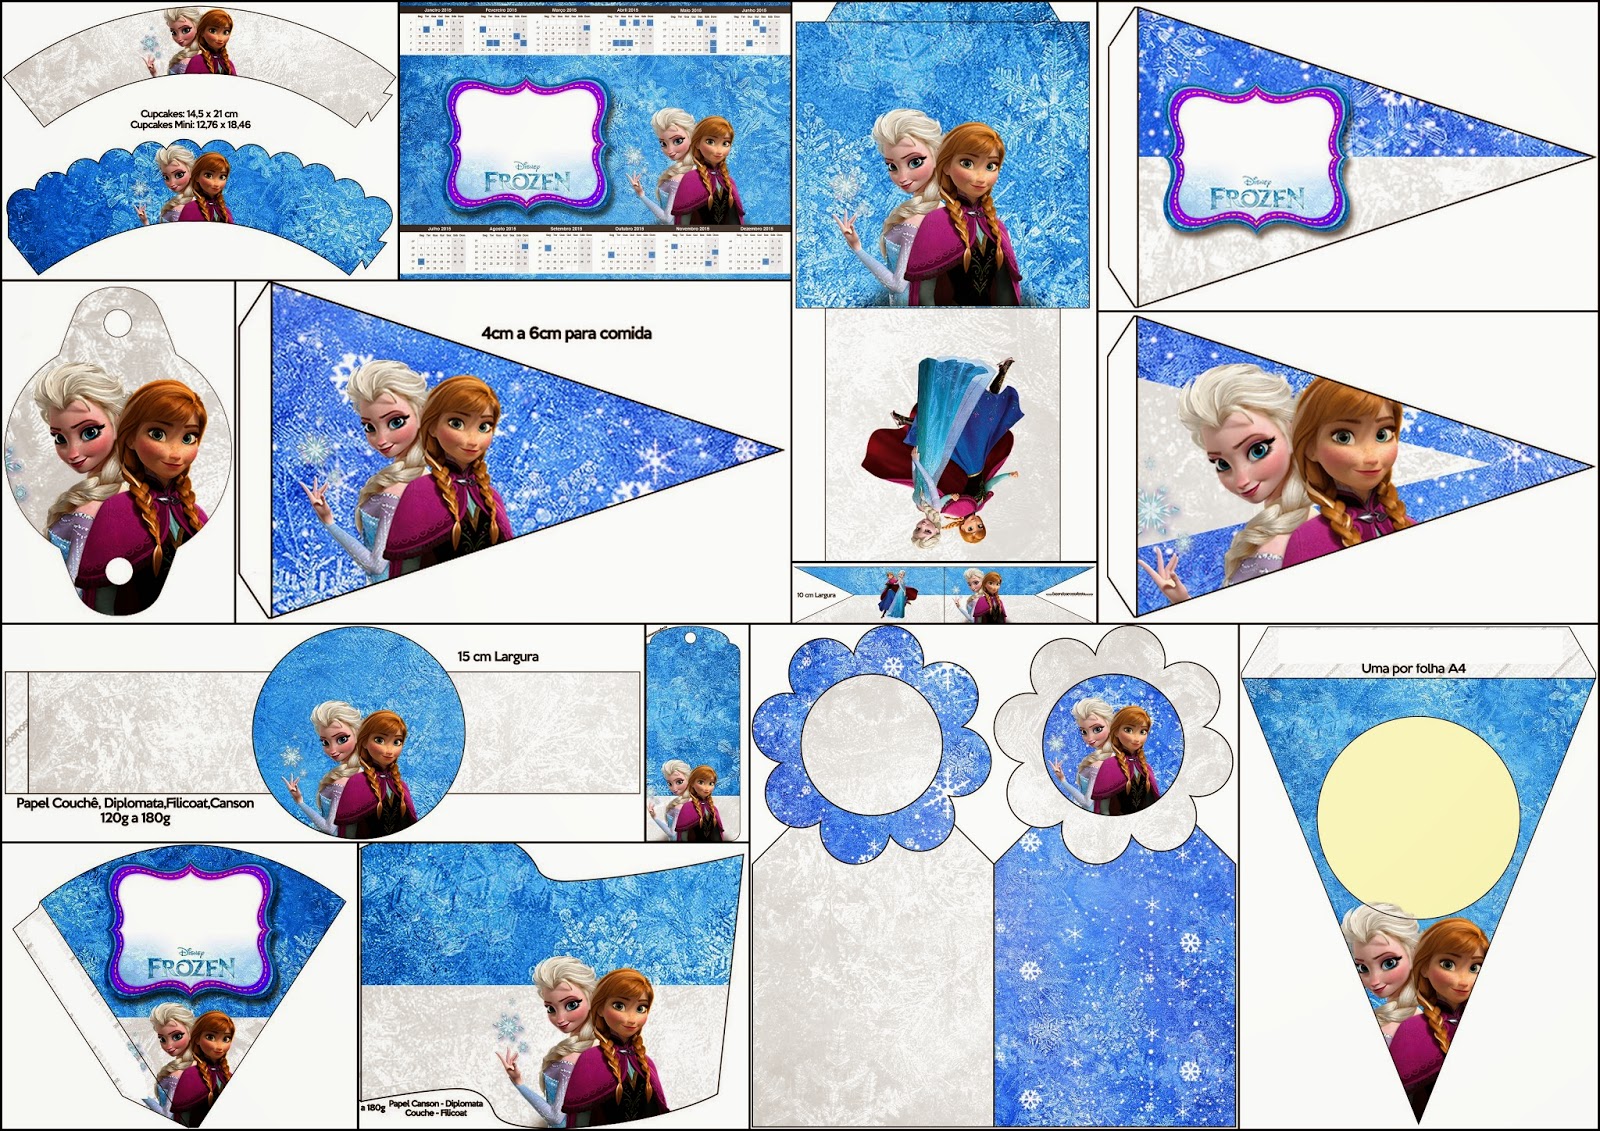 Frozen Birthday with Snow: Free Party Printables. - Oh My Fiesta! in english